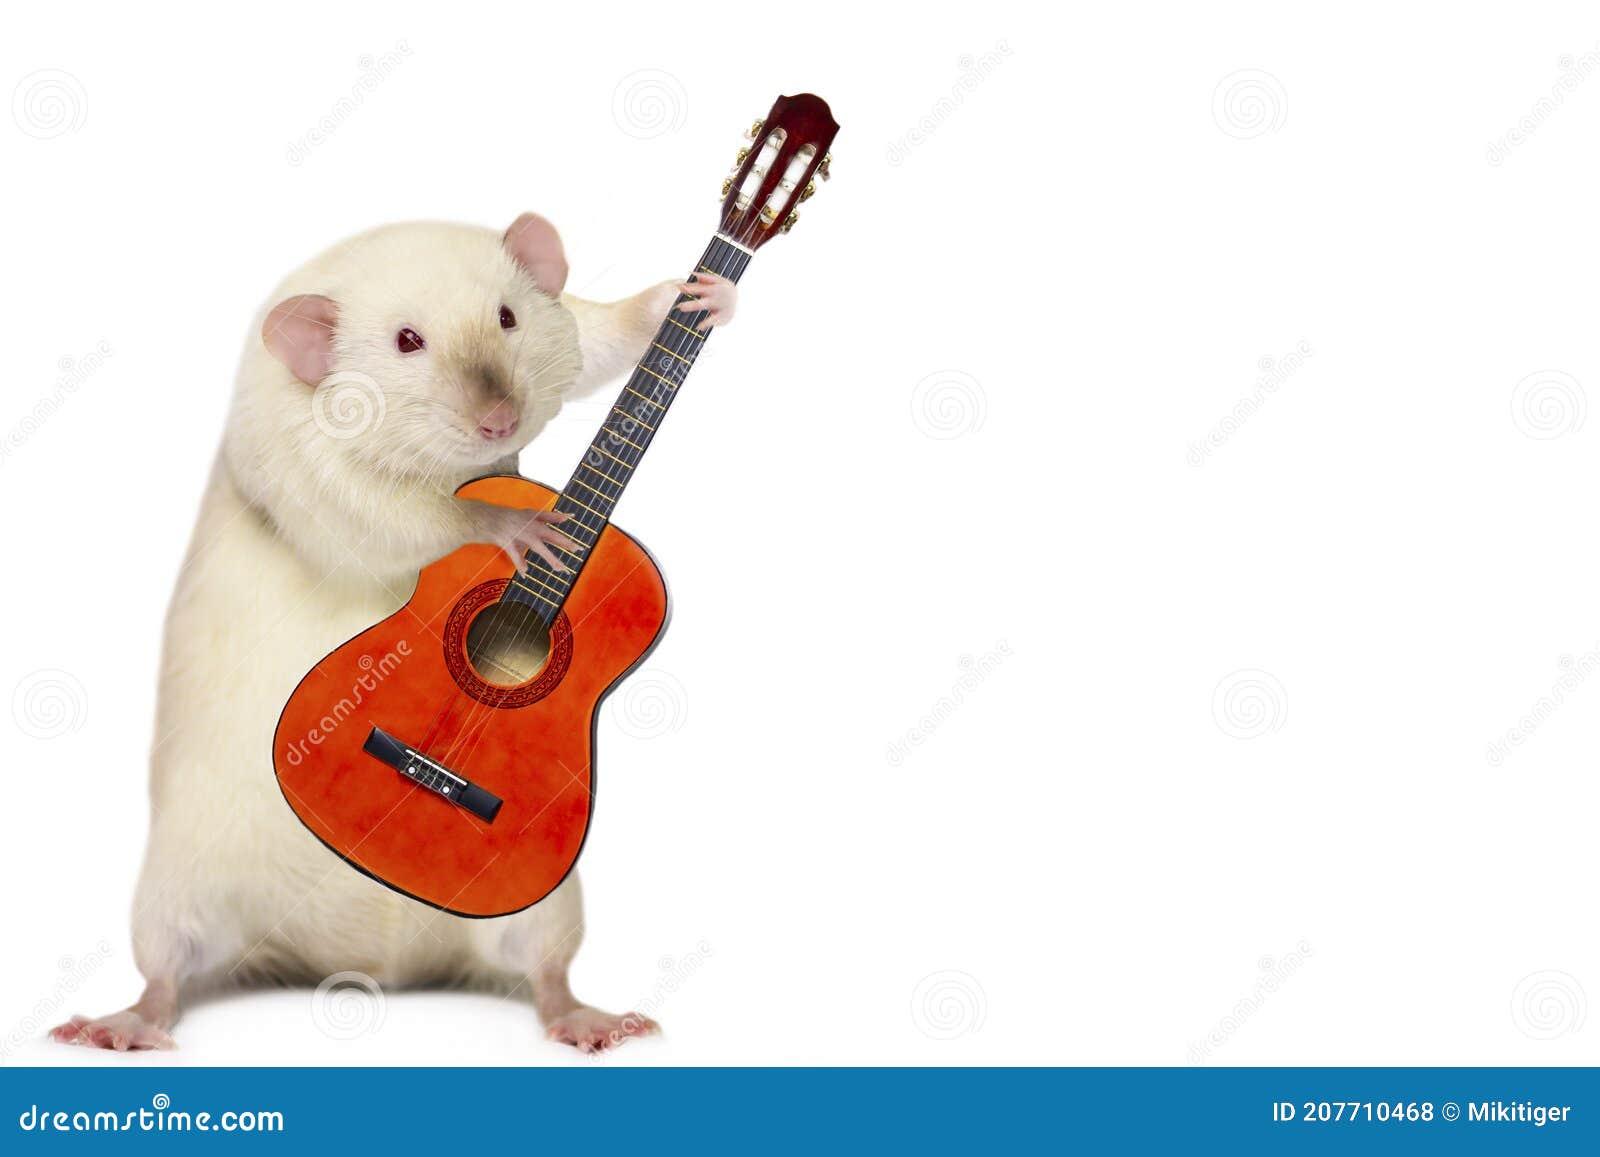 Funny Cute Rat Musician Playing Guitar Stock Photo - Image of ...